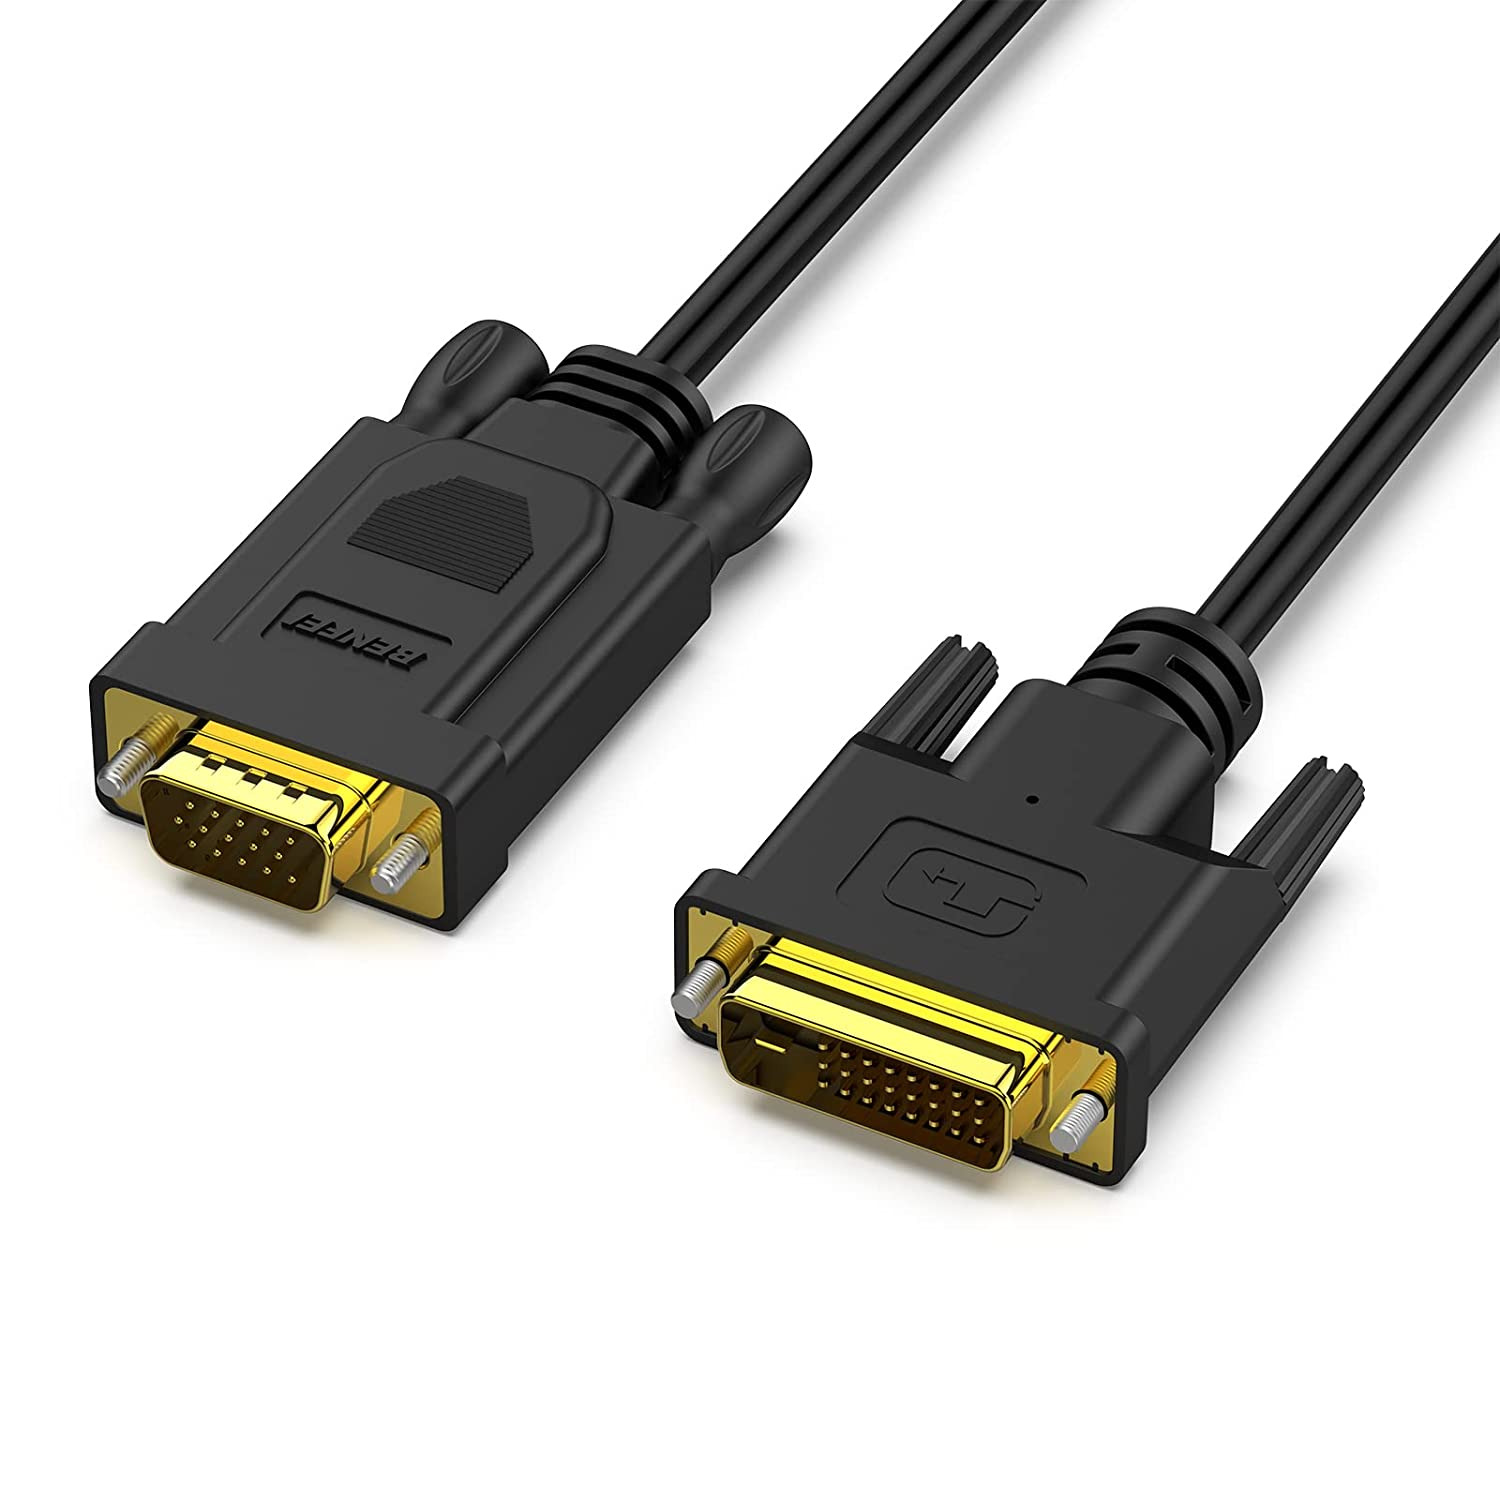 Active DVI-D to VGA, DVI-D 24+1 to VGA 6 Feet Cable Male to Male GoldPlated Cord